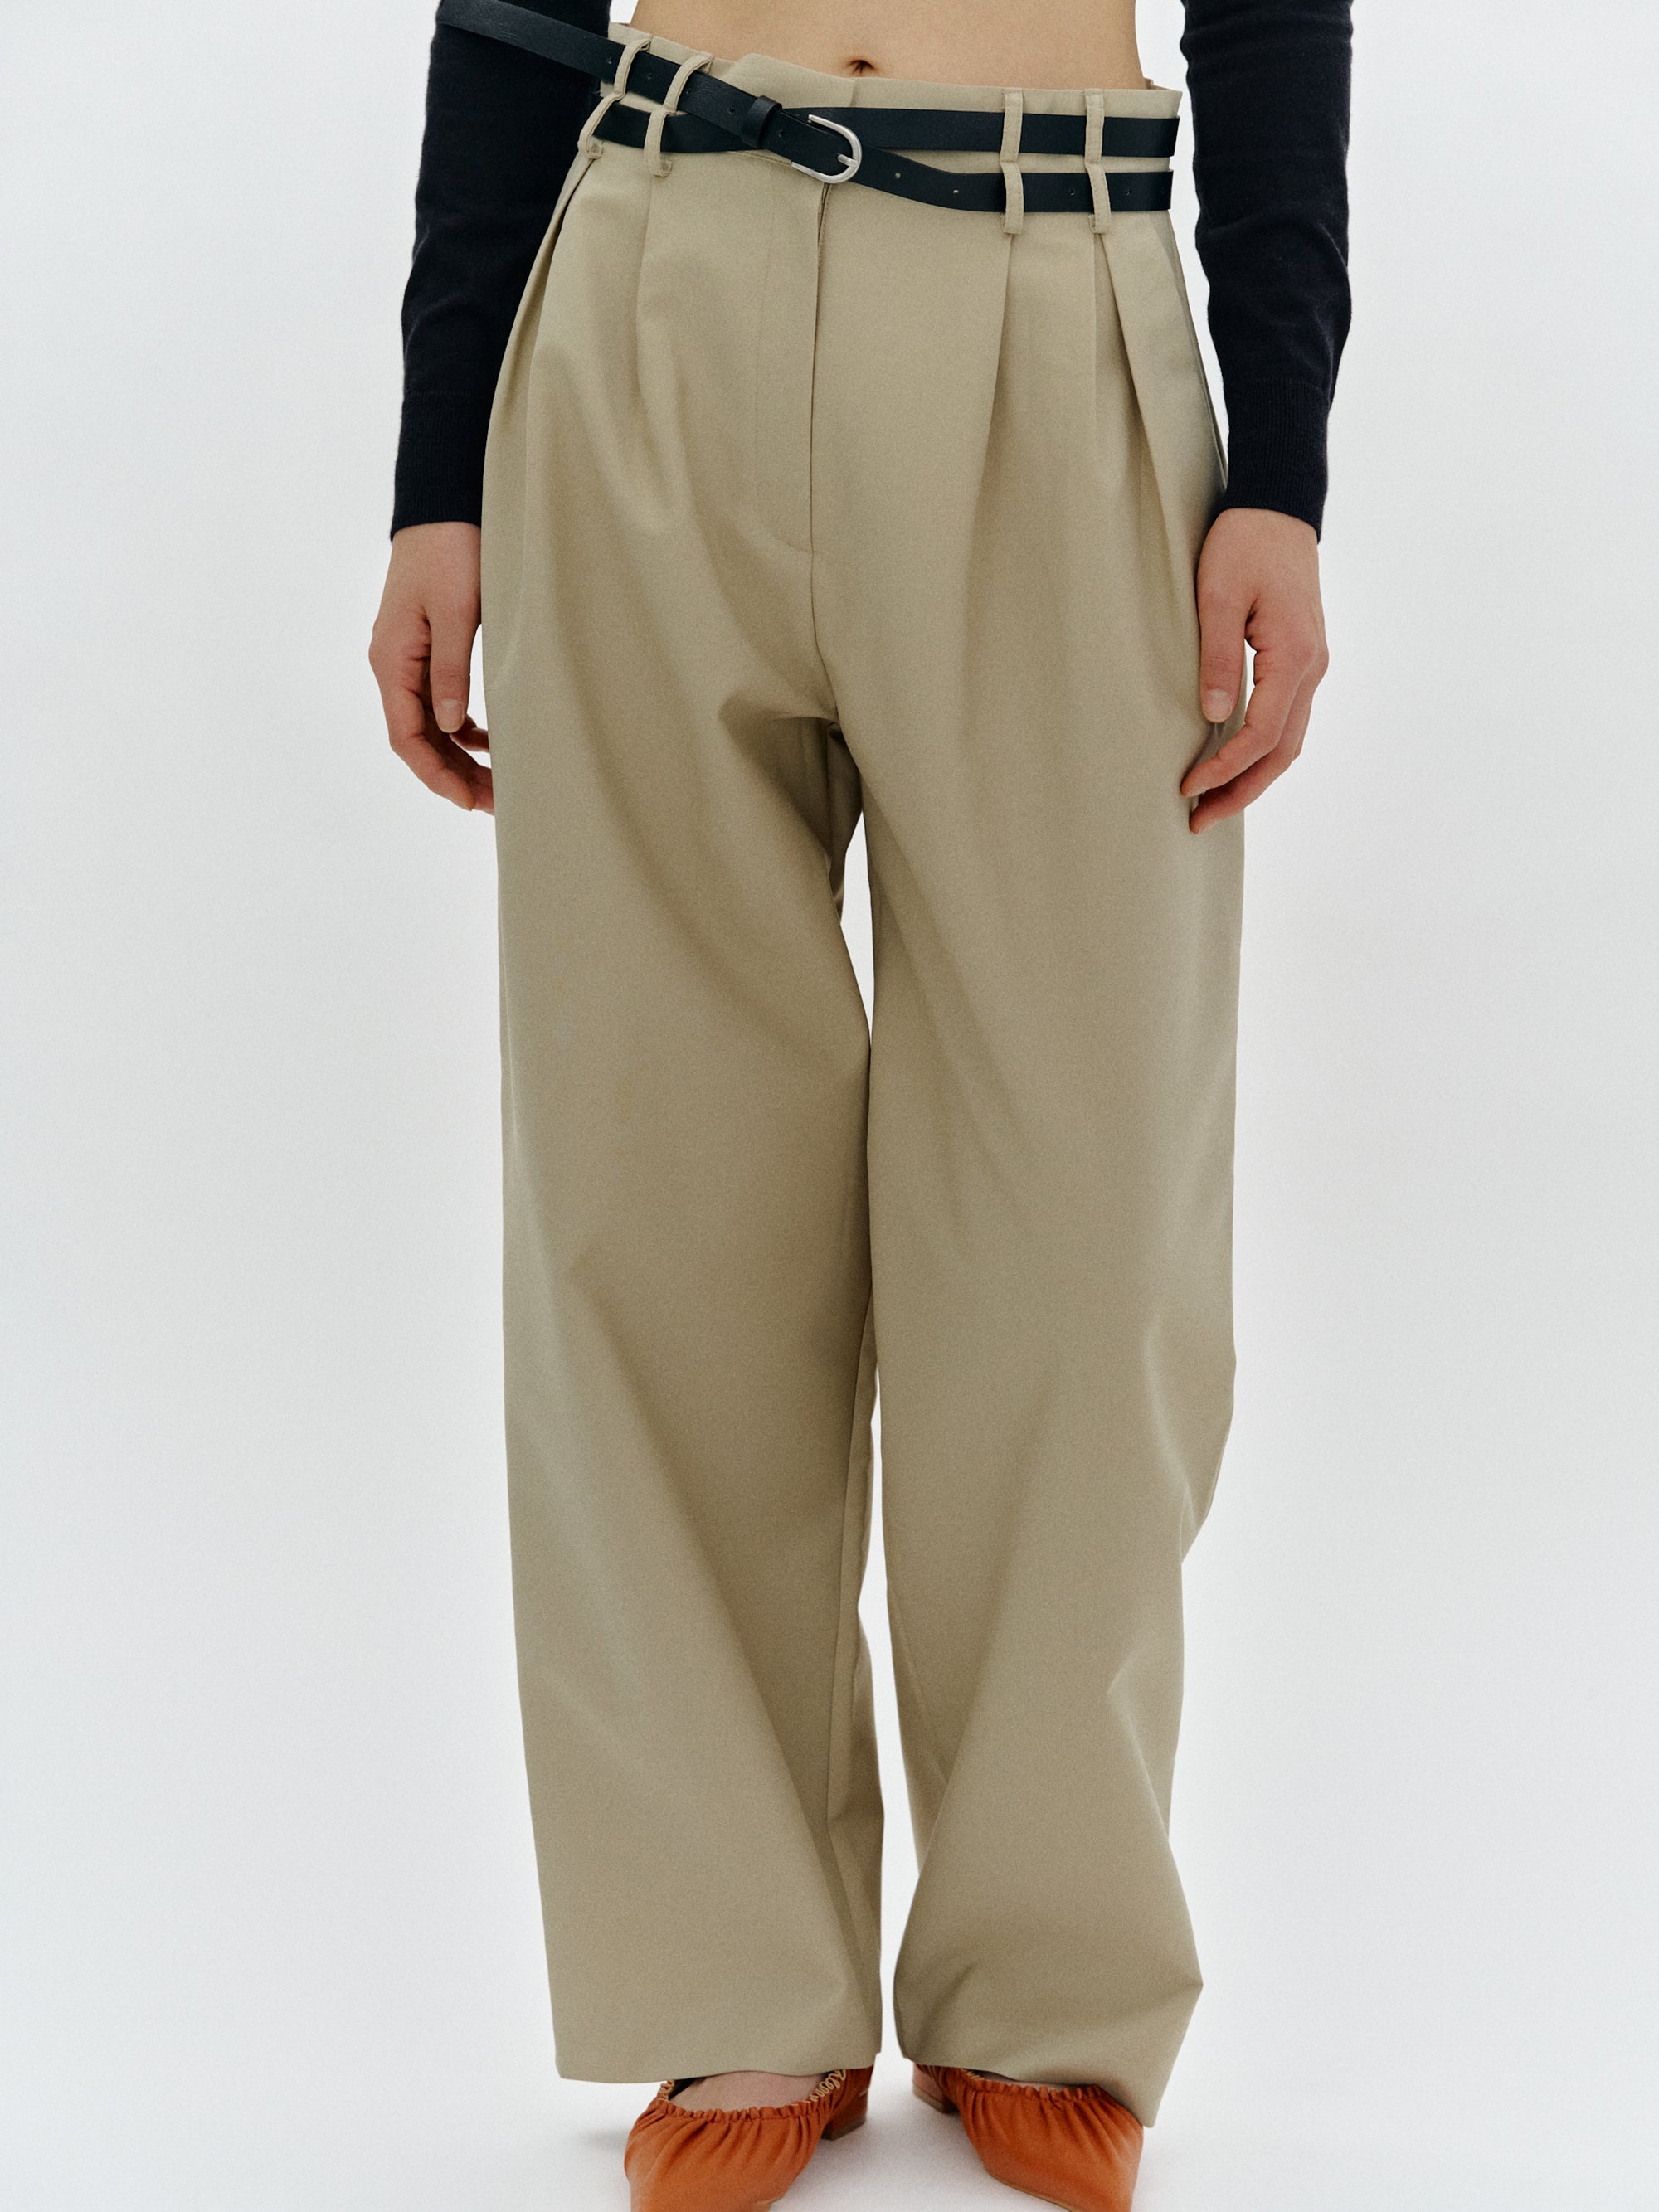 Double Belt Loop Trousers Grey  SourceUnknown